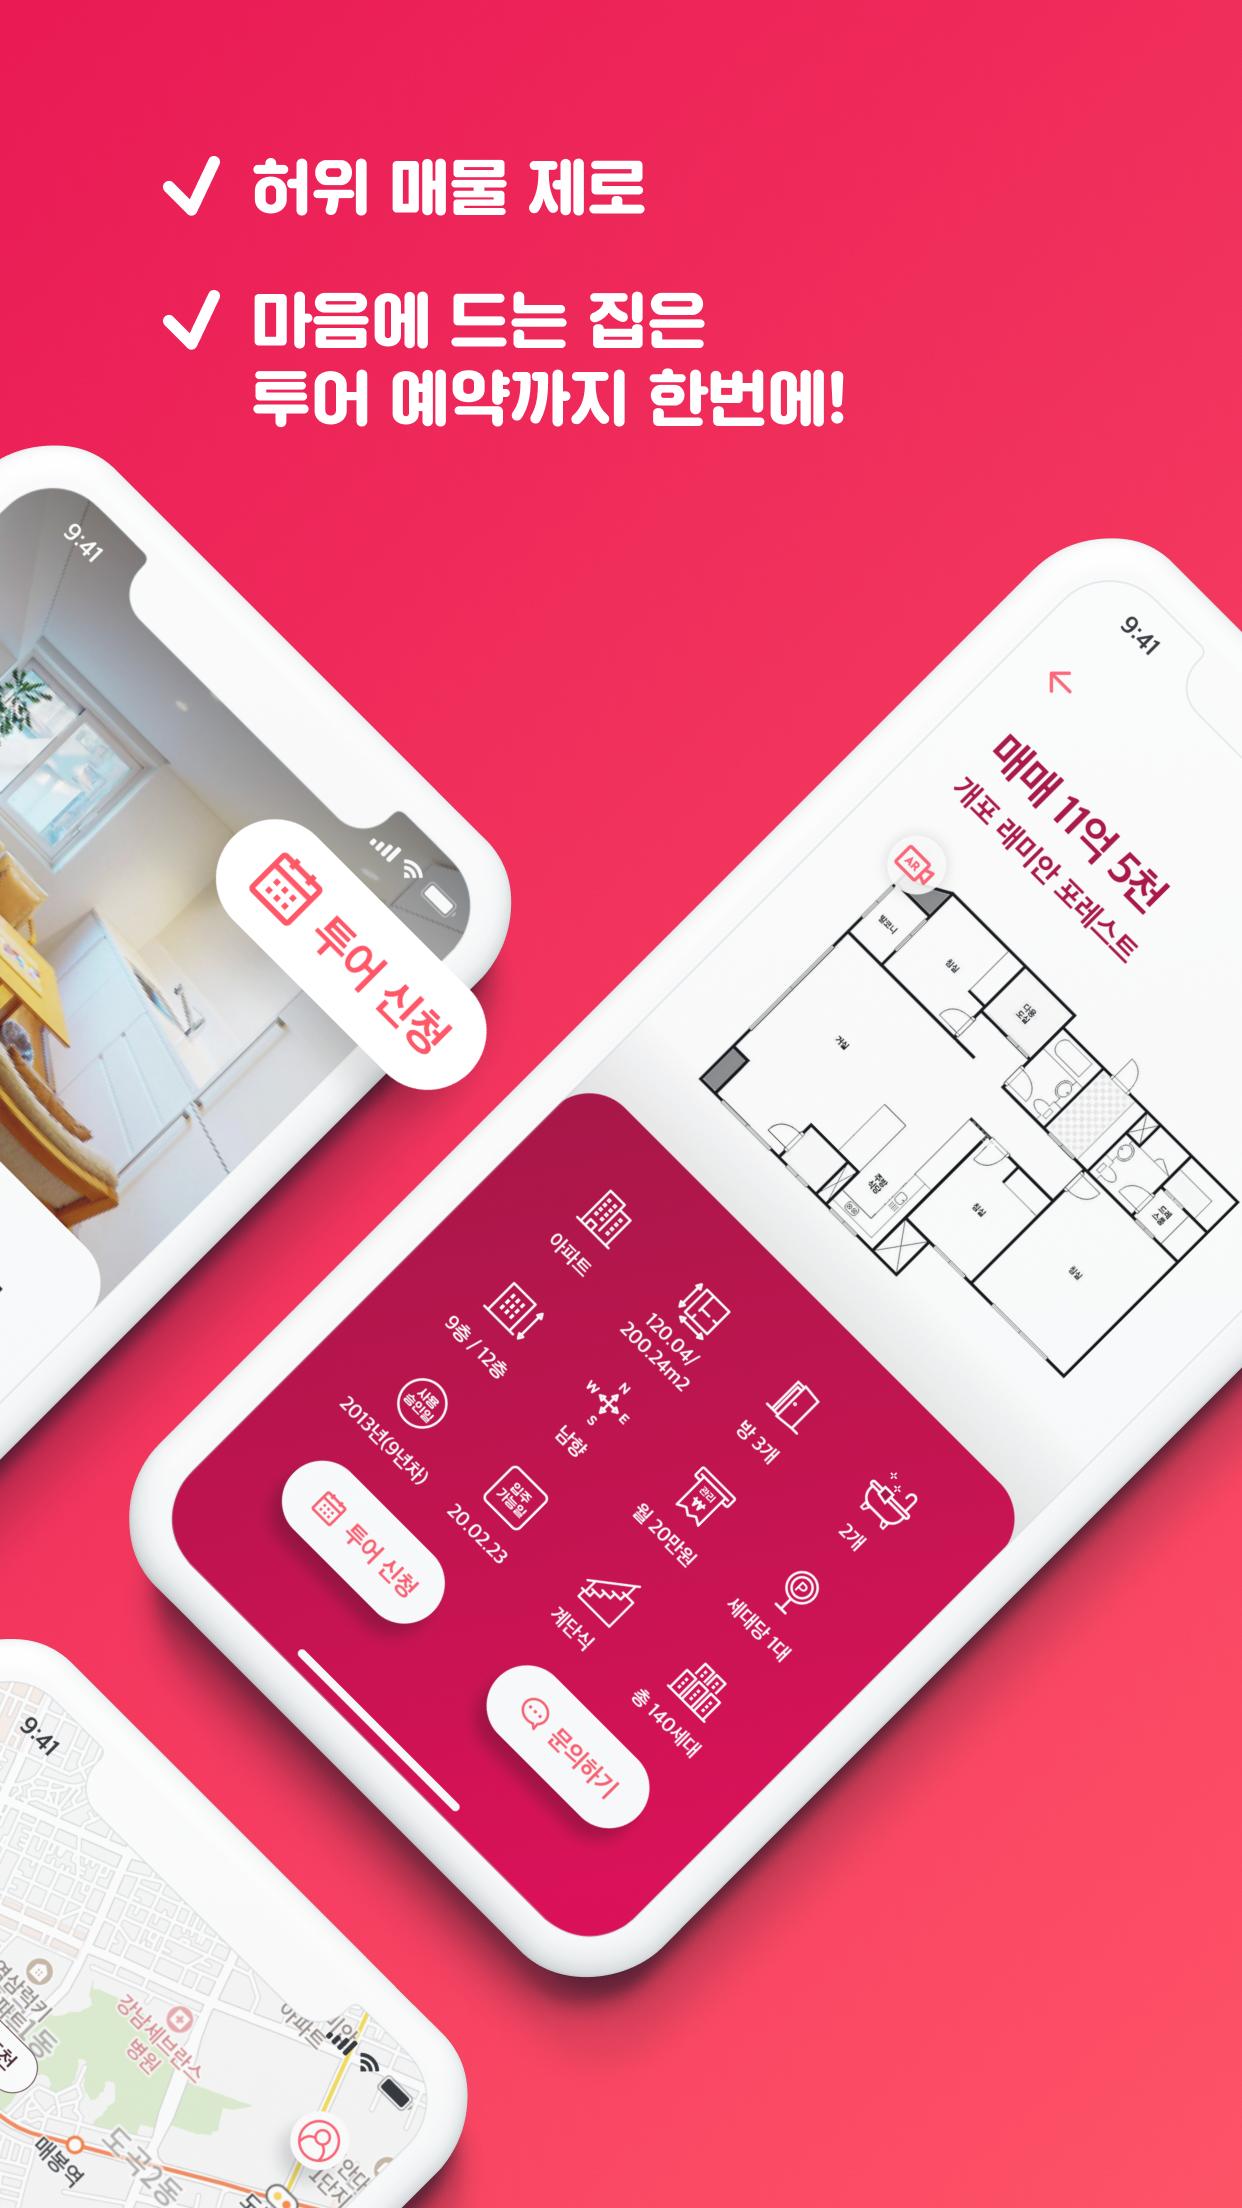 Dongnae Real Estate: Find Your Home 1.0.2 Screenshot 2